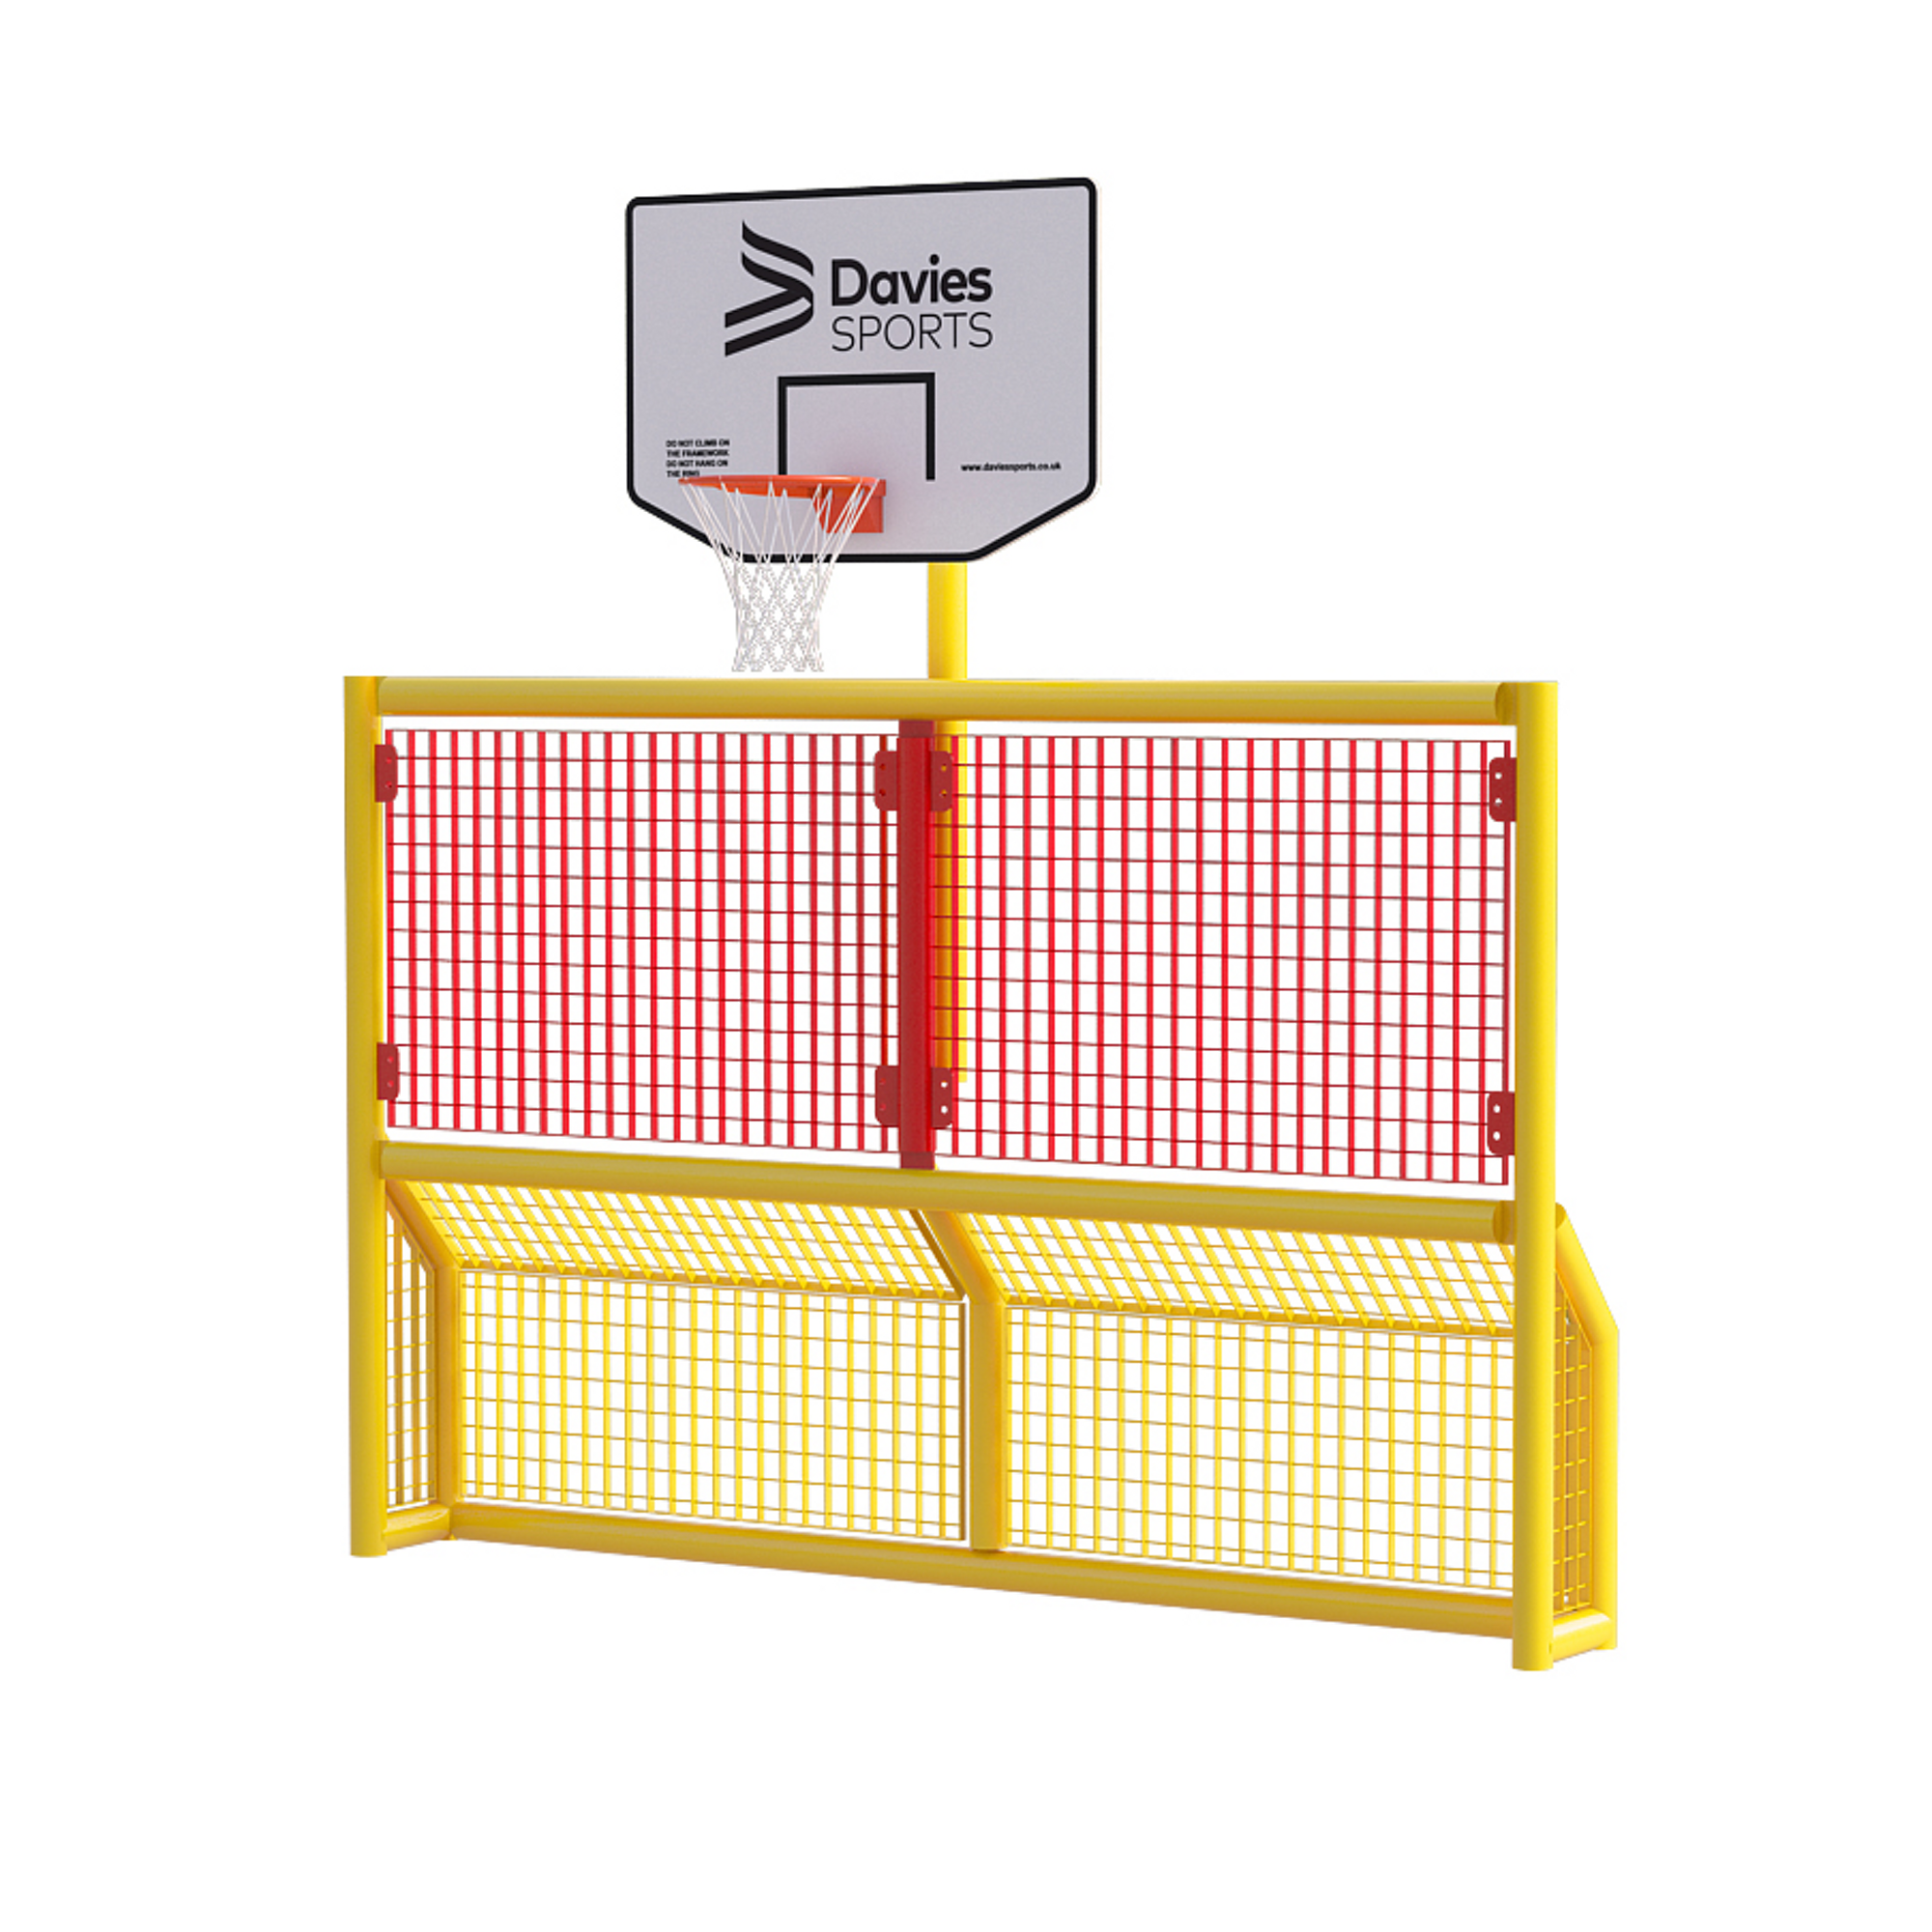 Primary 5aside Goal Bball Yel Frame Red